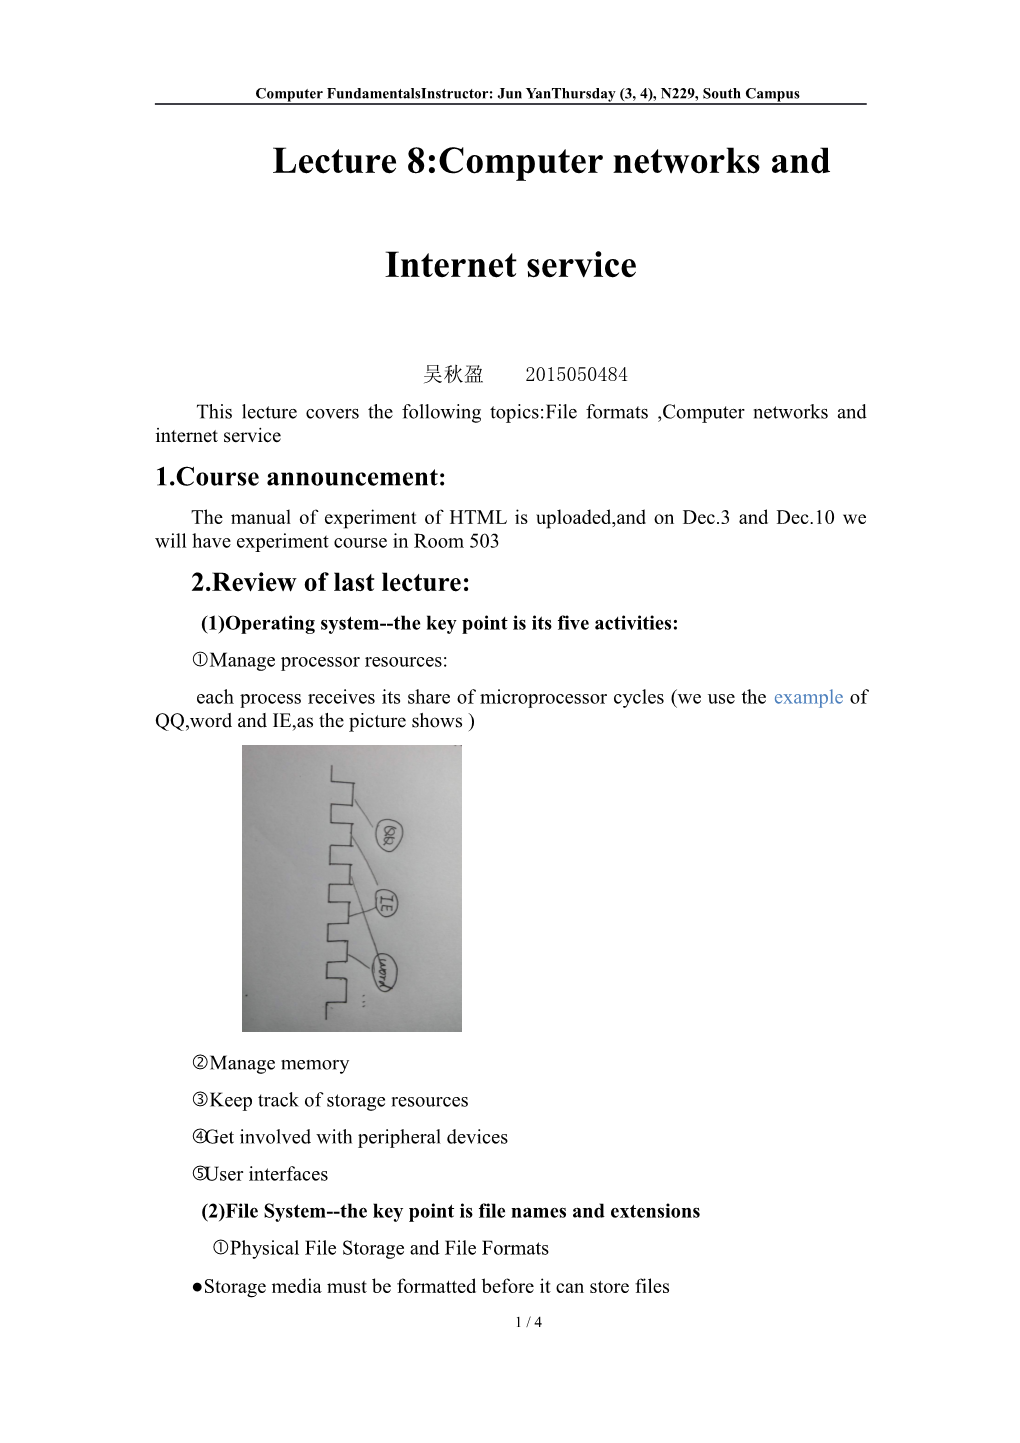 Lecture 8:Computer Networks and Internet Service